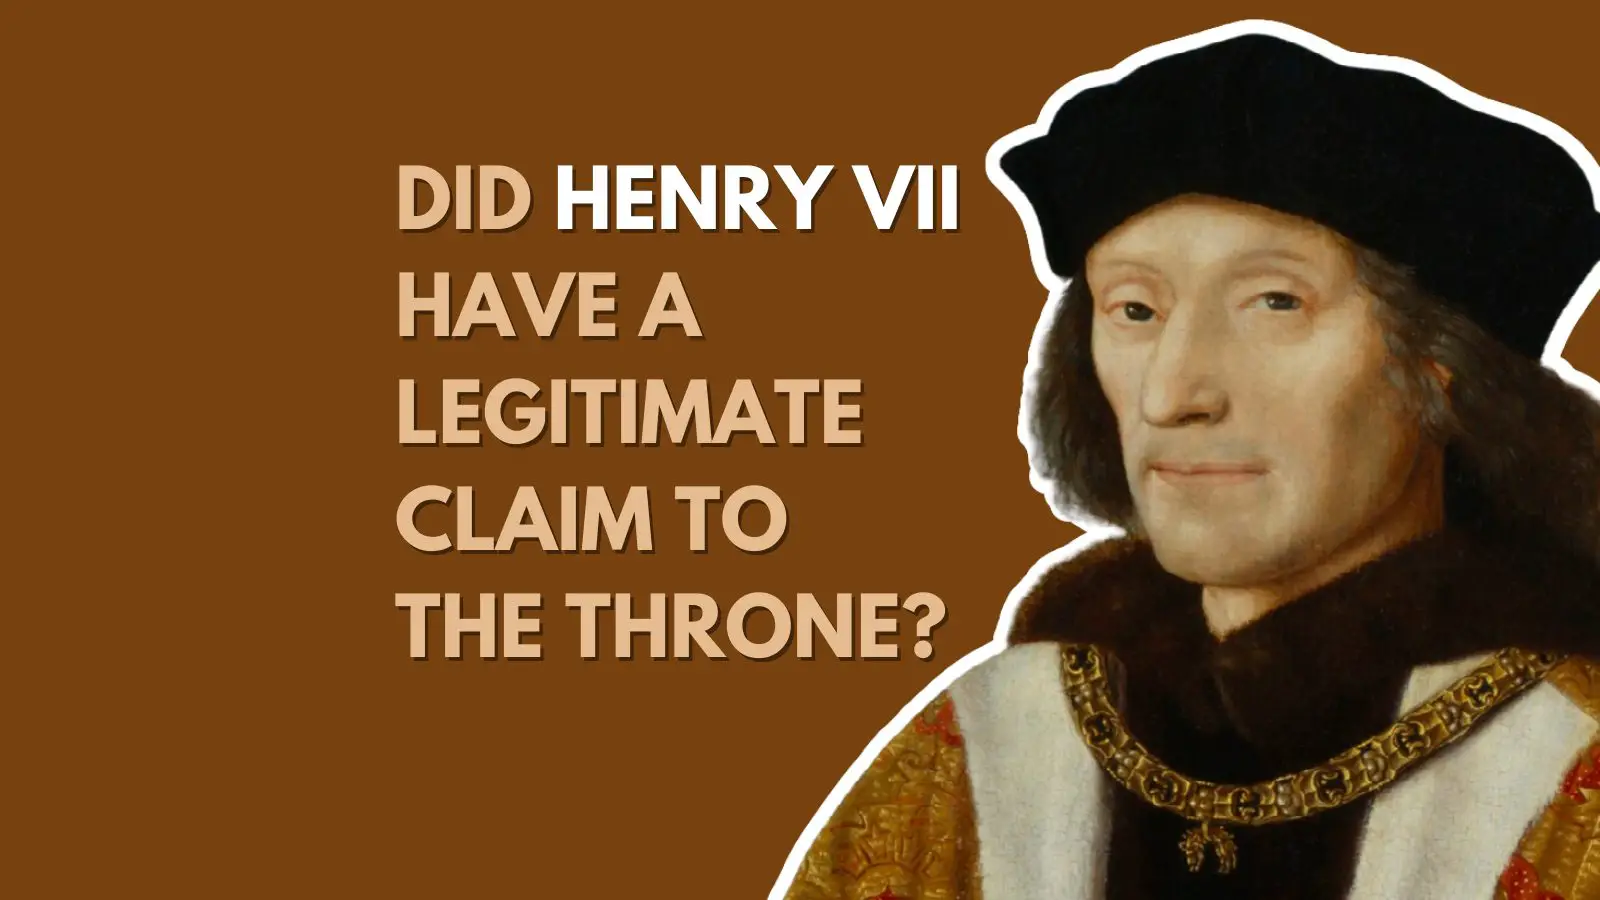 Did Henry VII have a legitimate claim to the throne